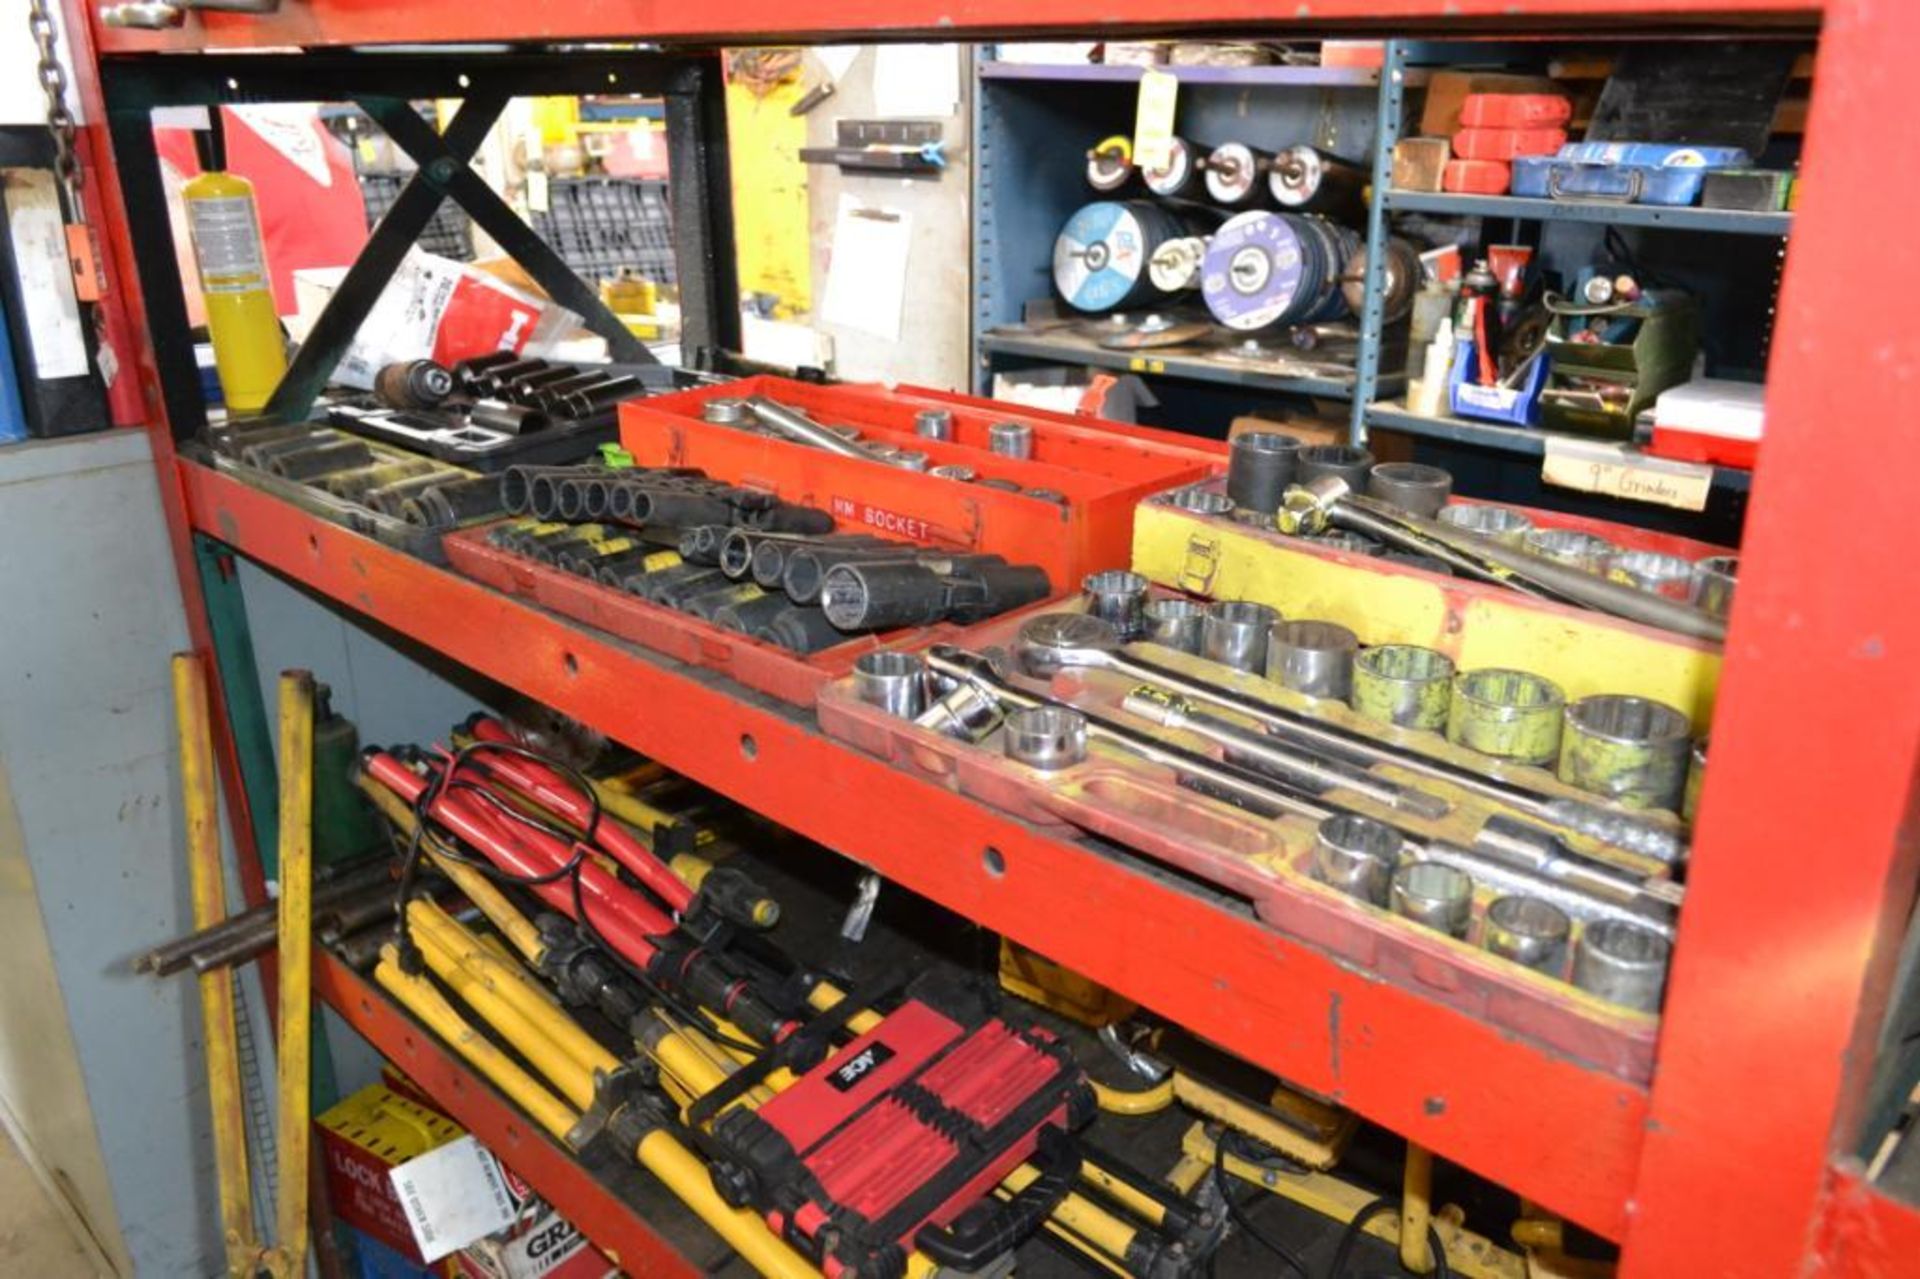 LOT: STEEL SHELVING UNIT WITH CONTENTS OF LARGE COMBO WRENCHES; WORK LIGHTS; SOCKET SETS; IMPACT